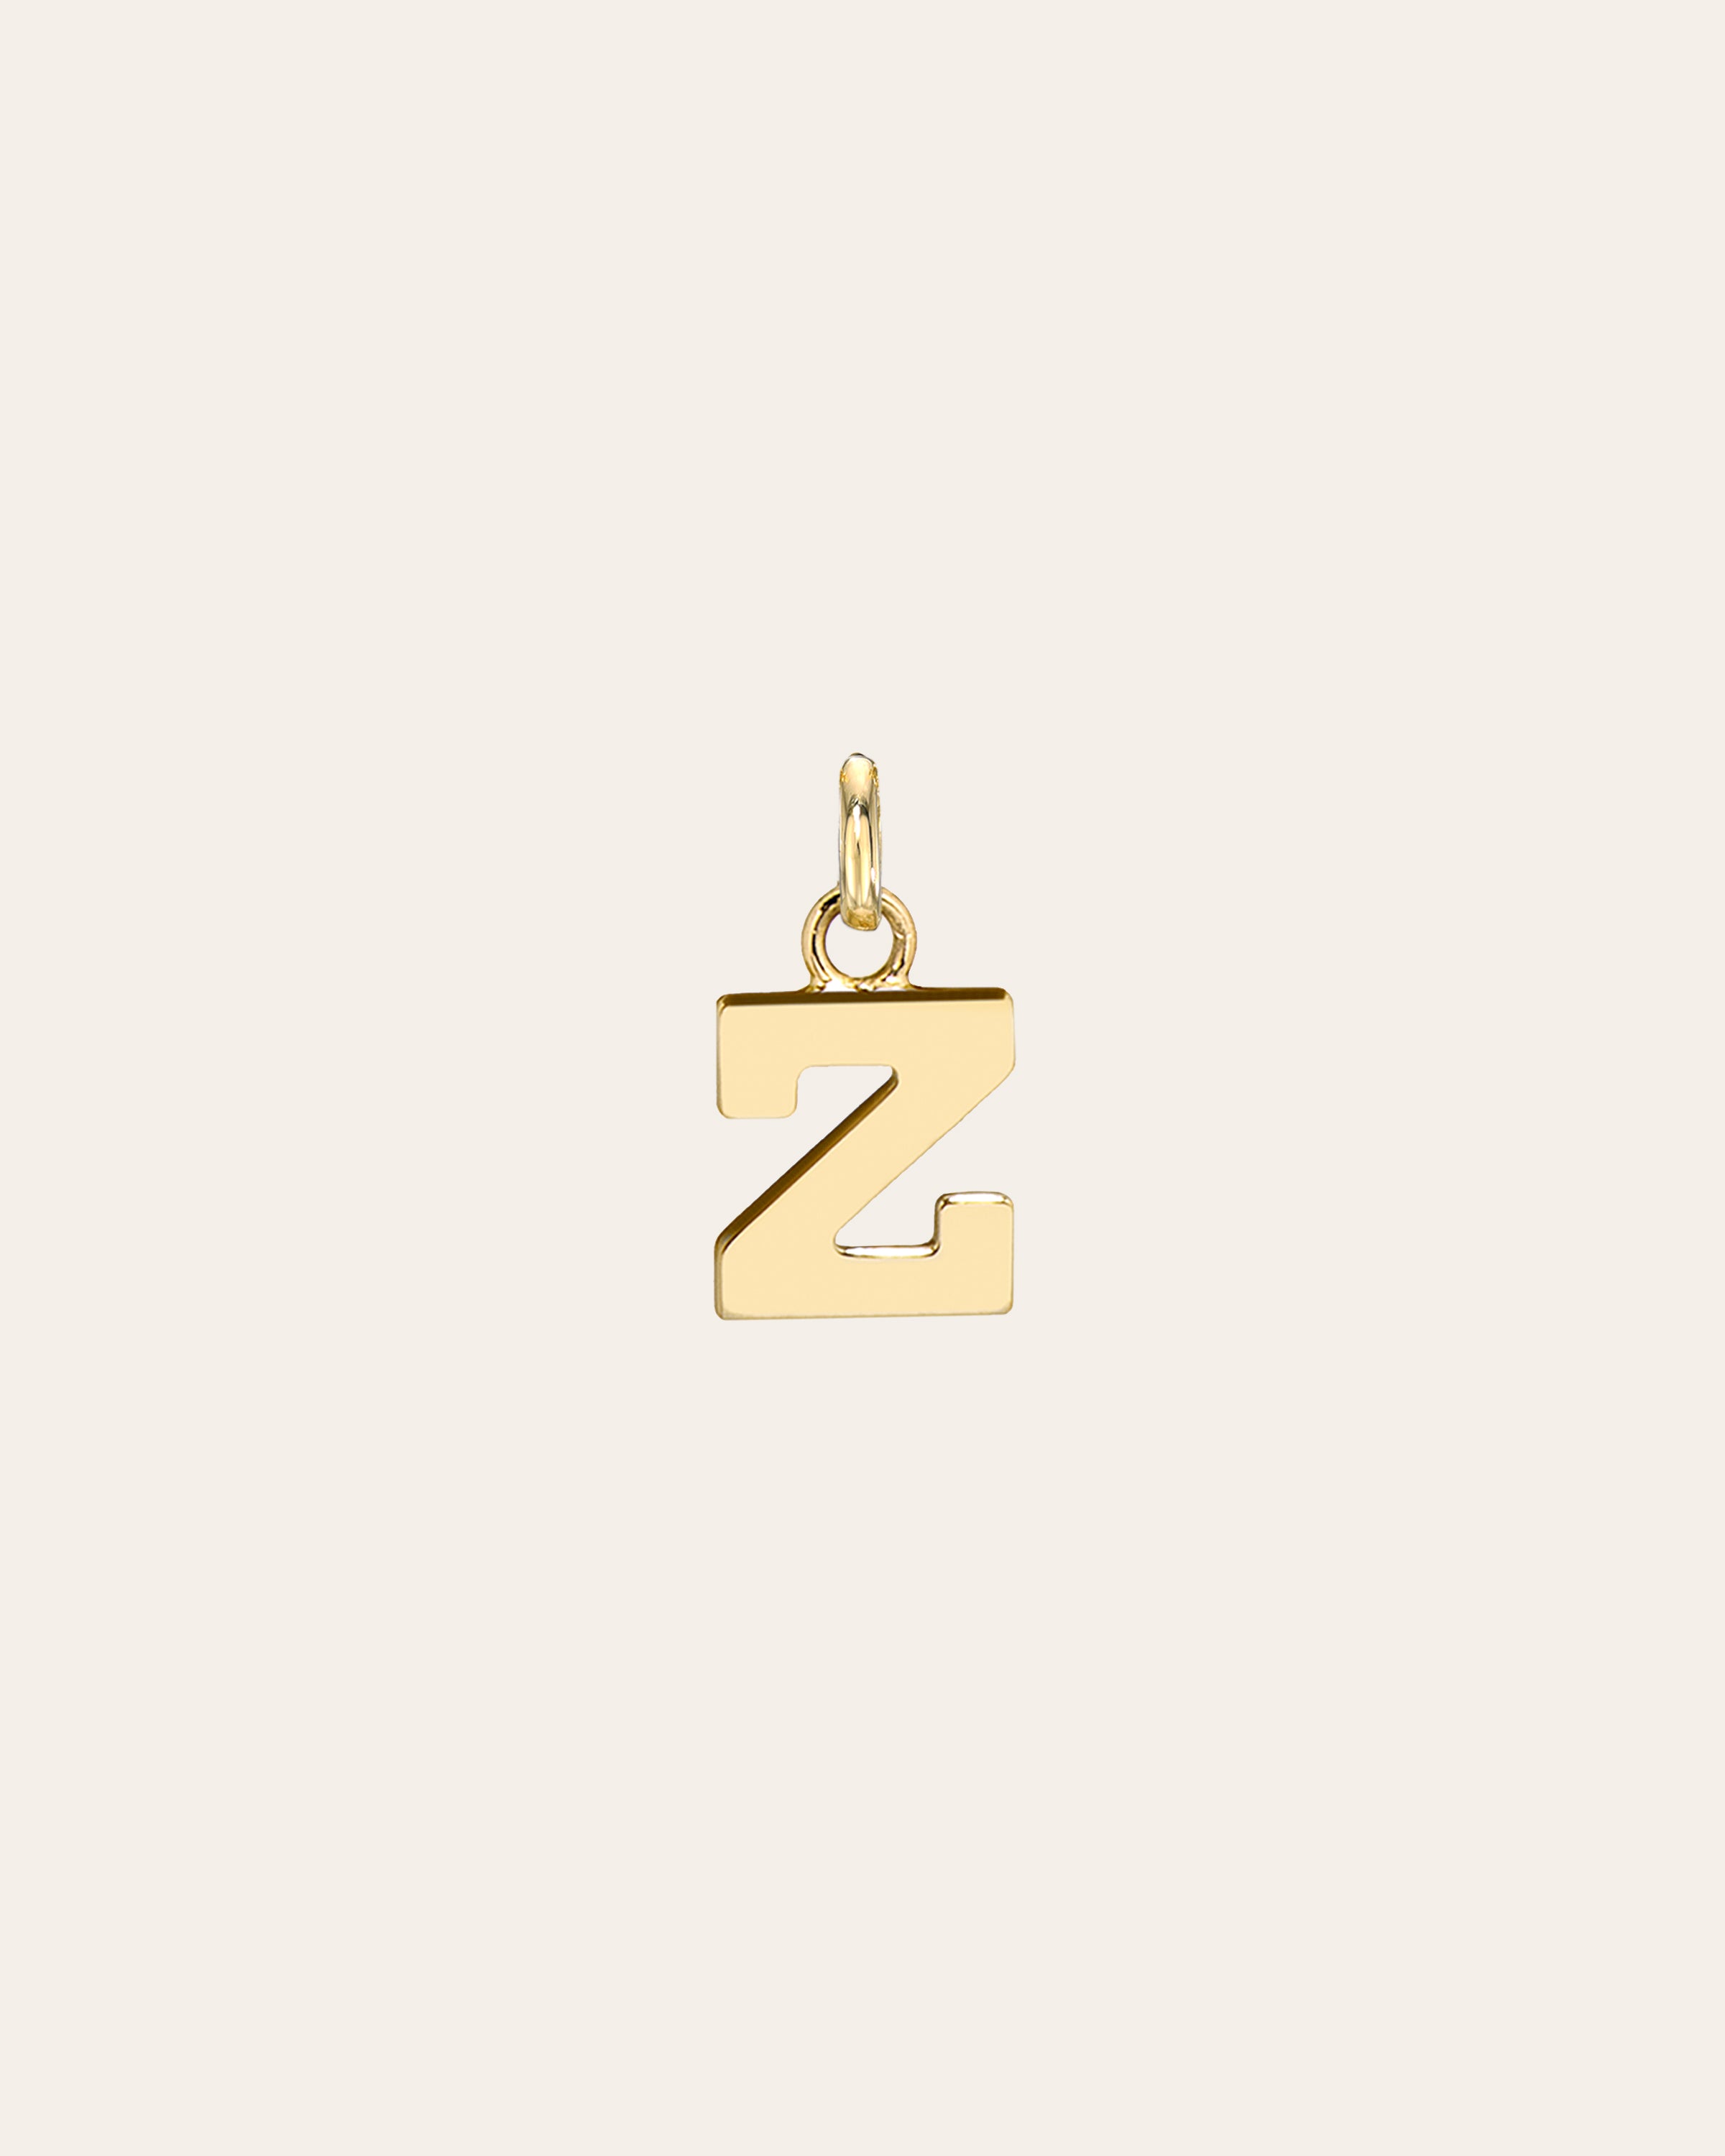 Initial Charm P / 14K Yellow Gold